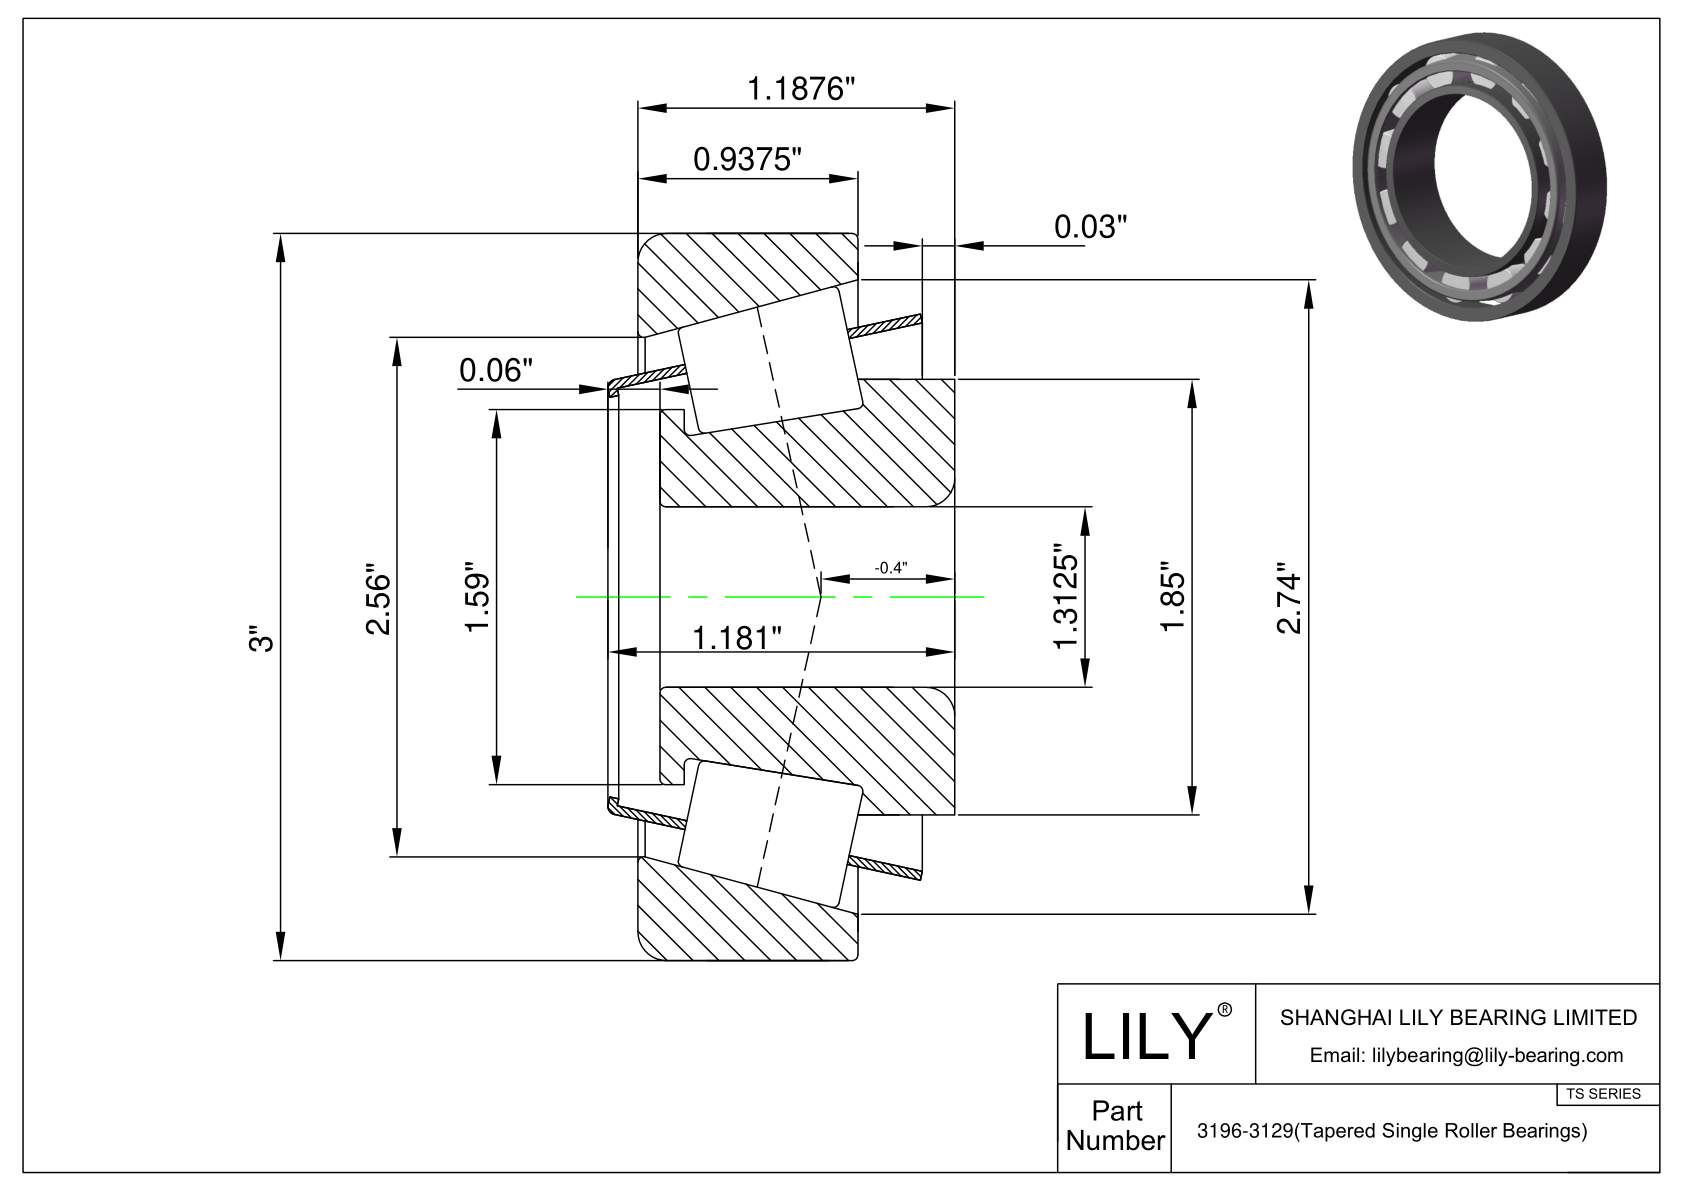 3196-3129 TS (Tapered Single Roller Bearings) (Imperial) cad drawing